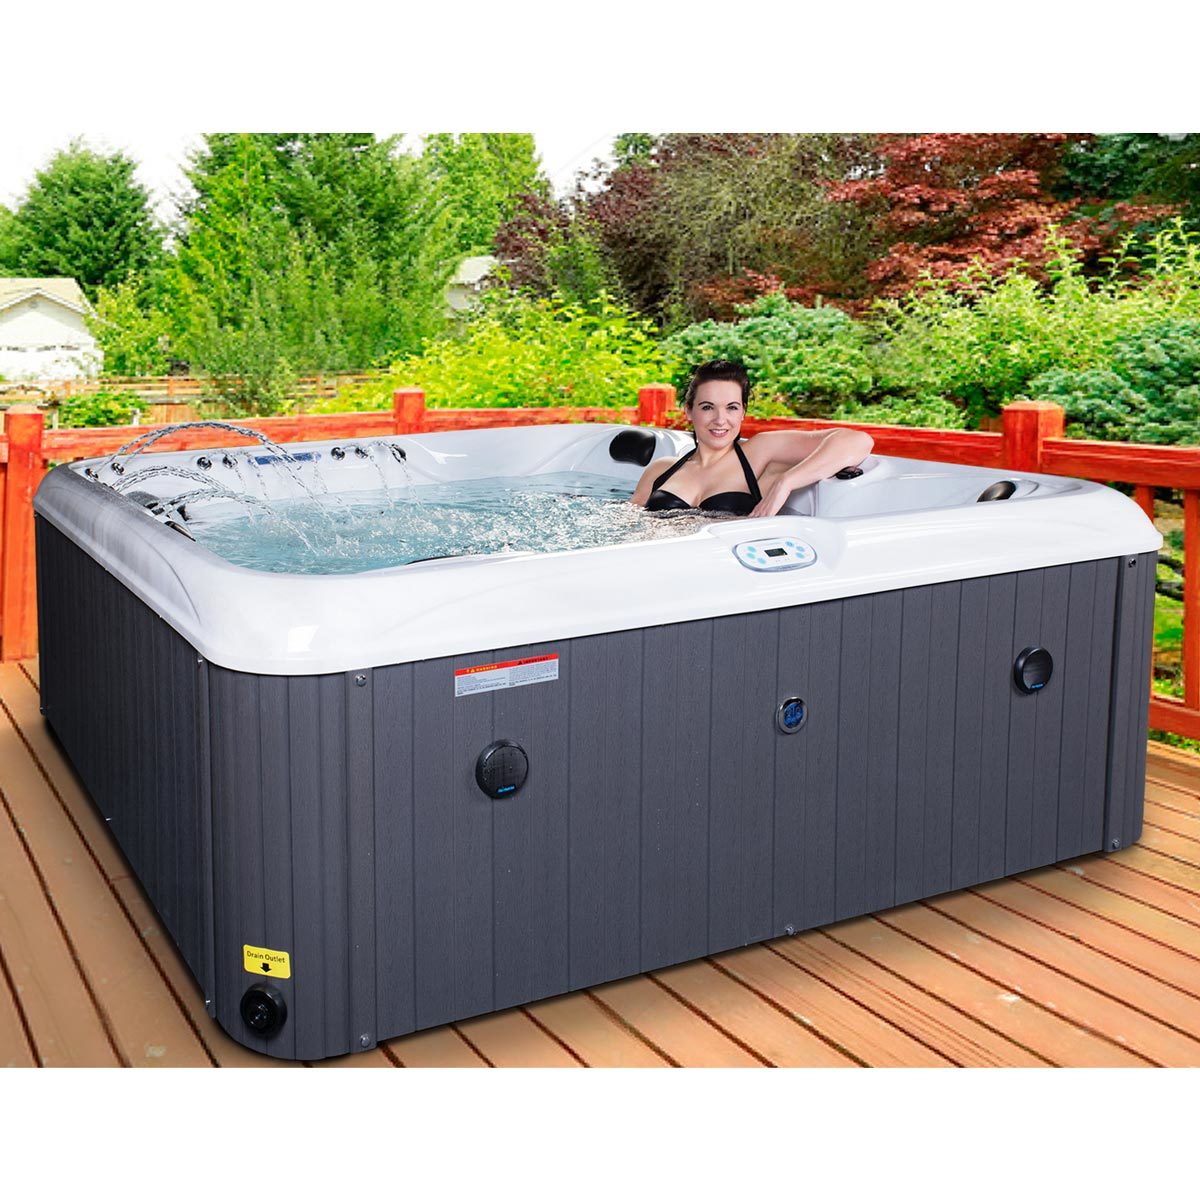 Blue Whale Spa Longport 120 Jet 5 Person Hot Tub Delivered And Installed Costco Uk